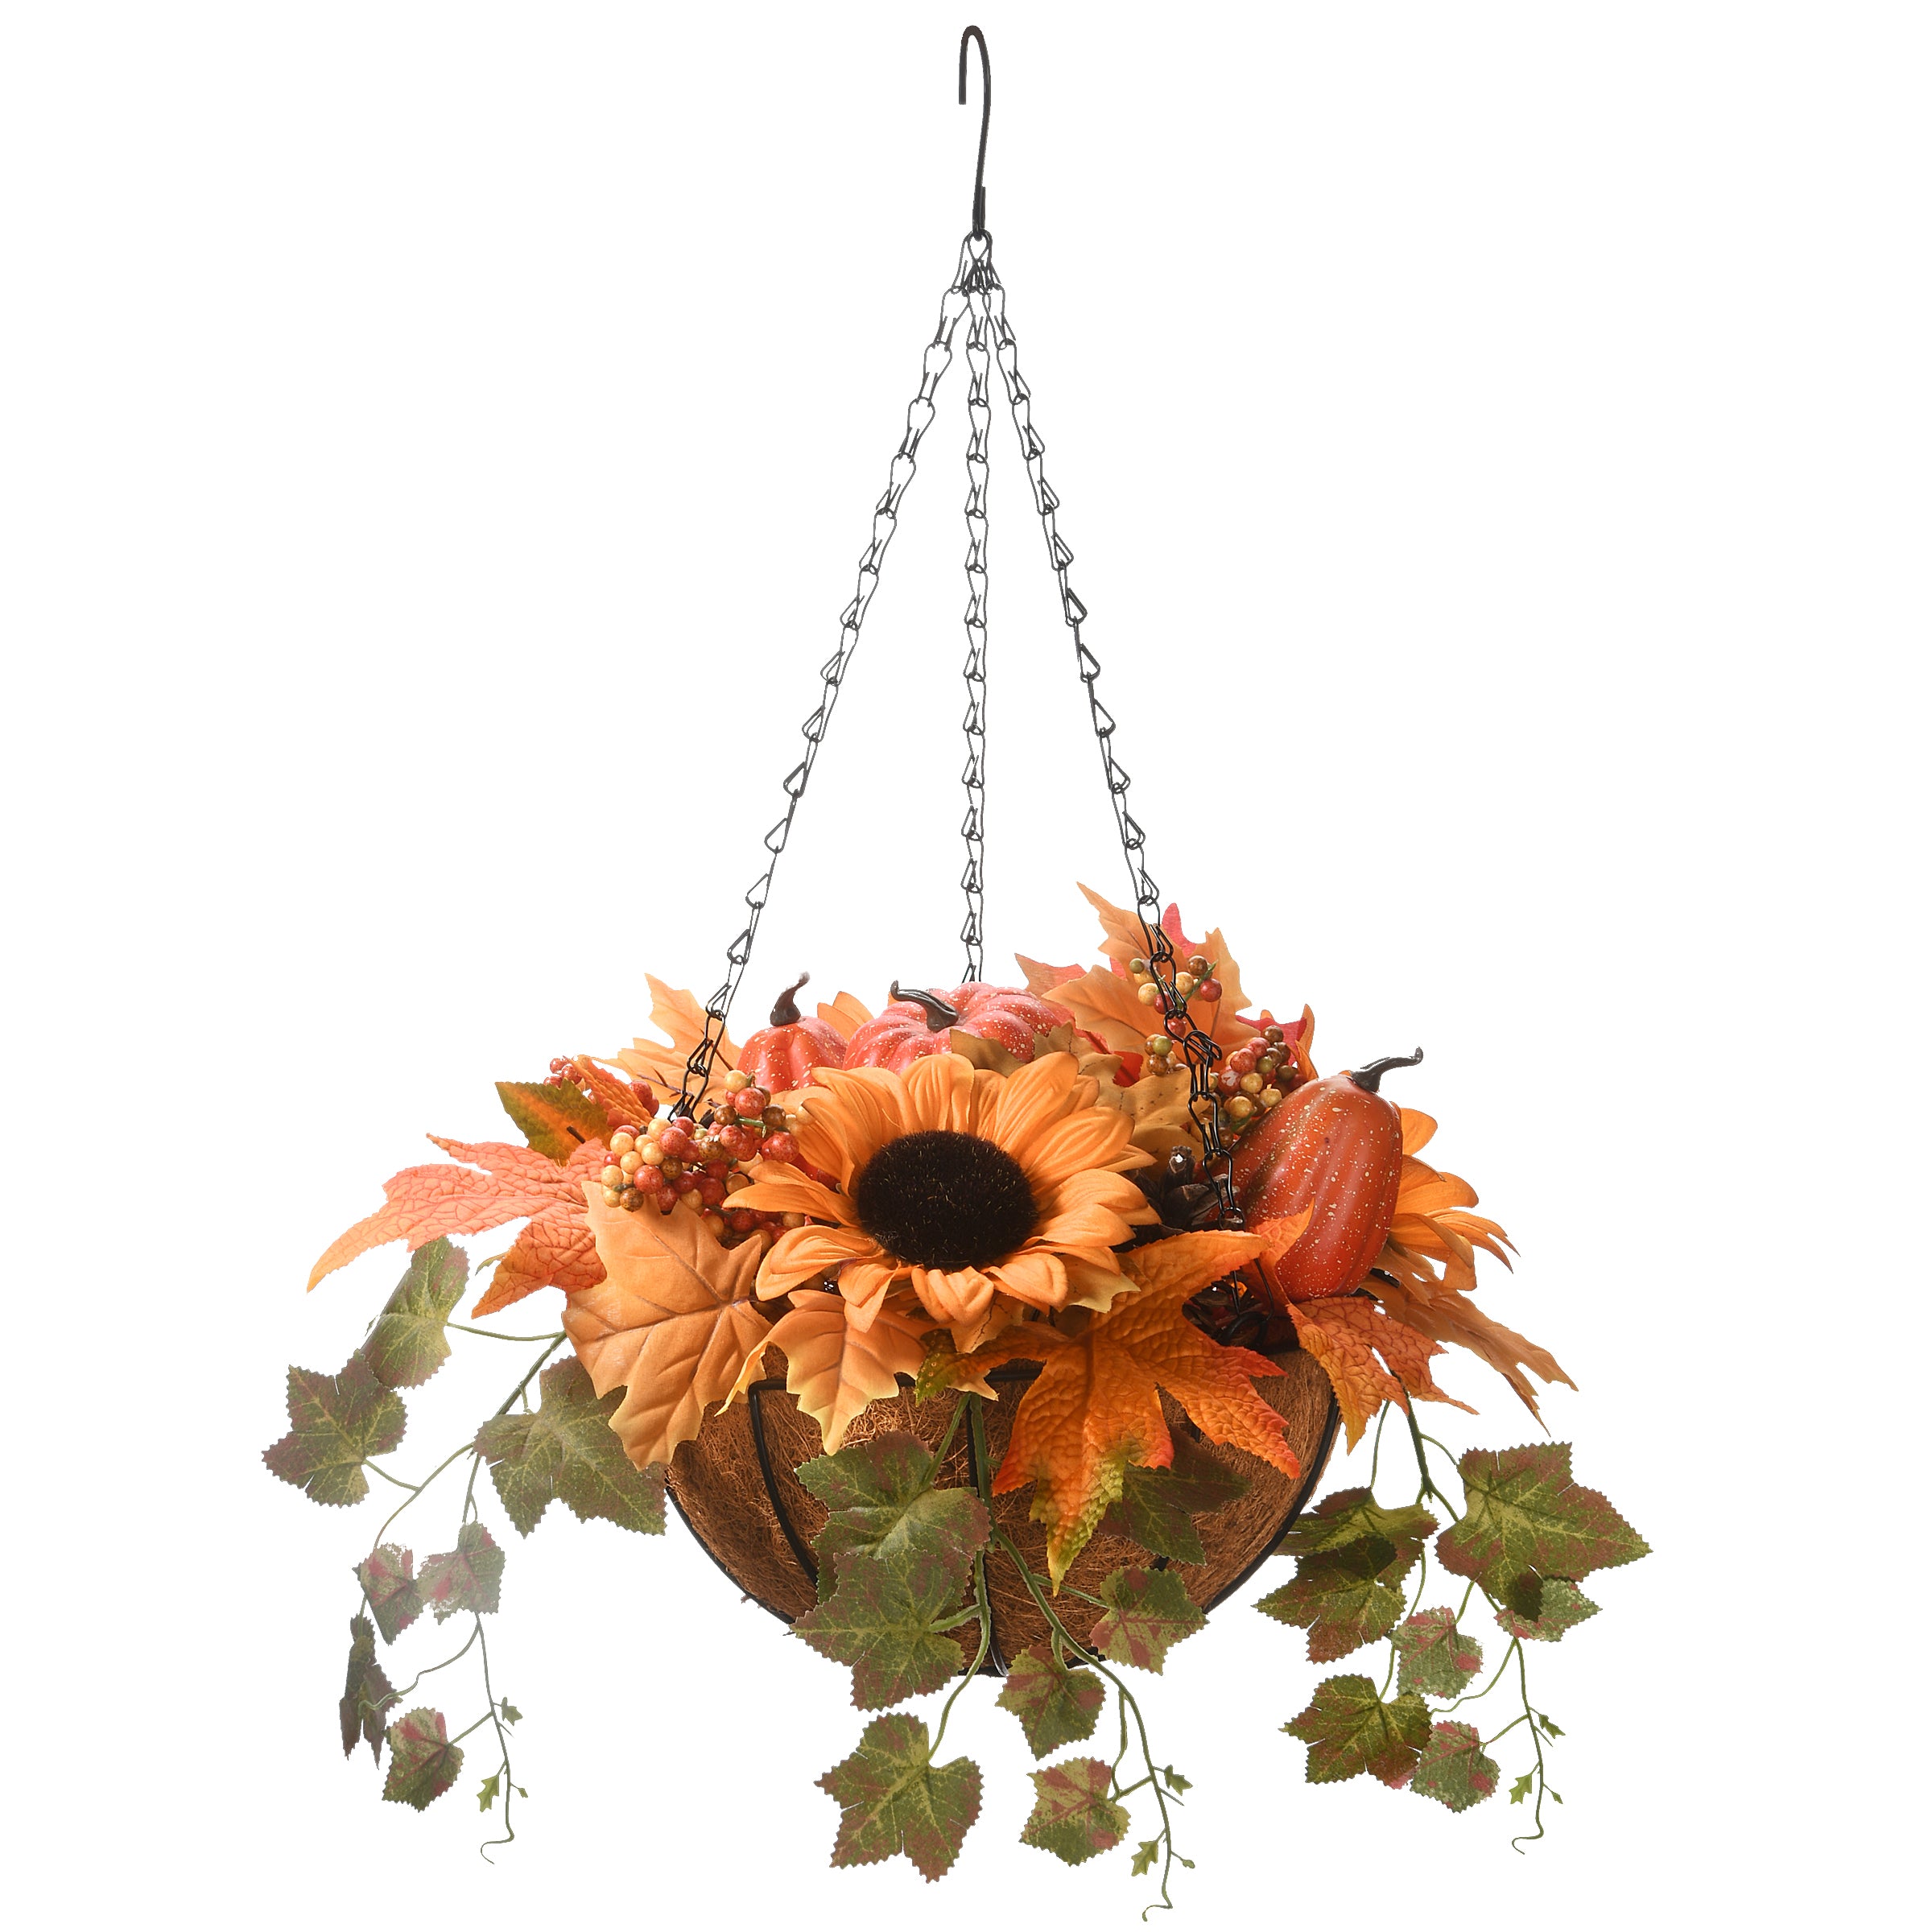 18" Hanging Basket with Ivy Leaves, 3 Sunflowers, 3 Cones, 3 Berries, 3 Gourds & 1 Pumpkin